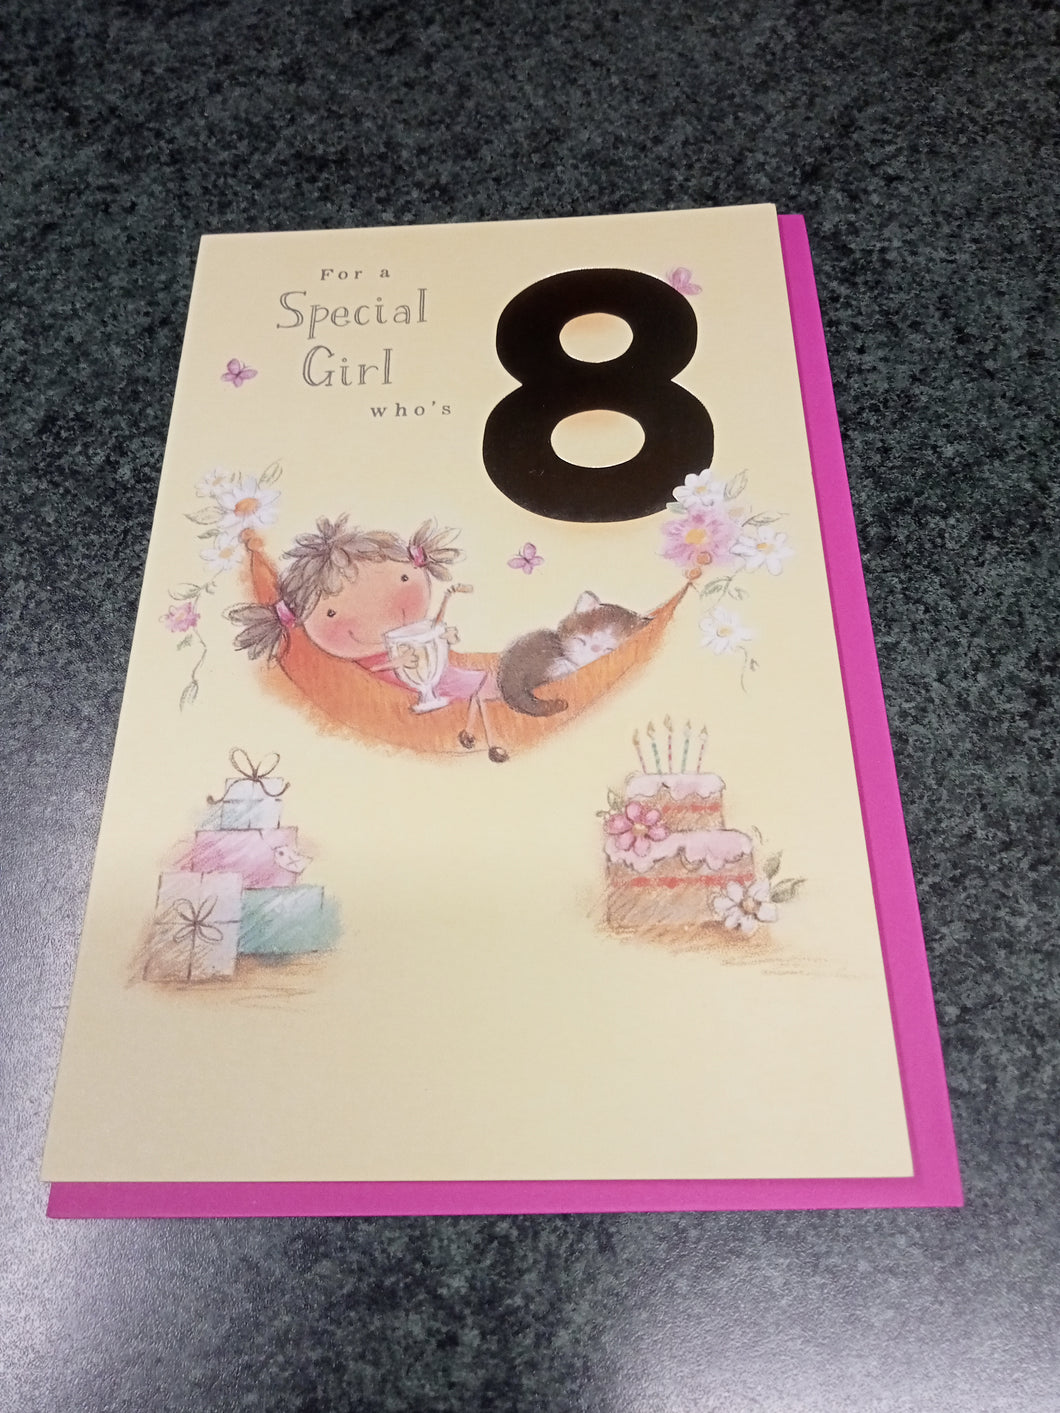 For a special girl who's 8